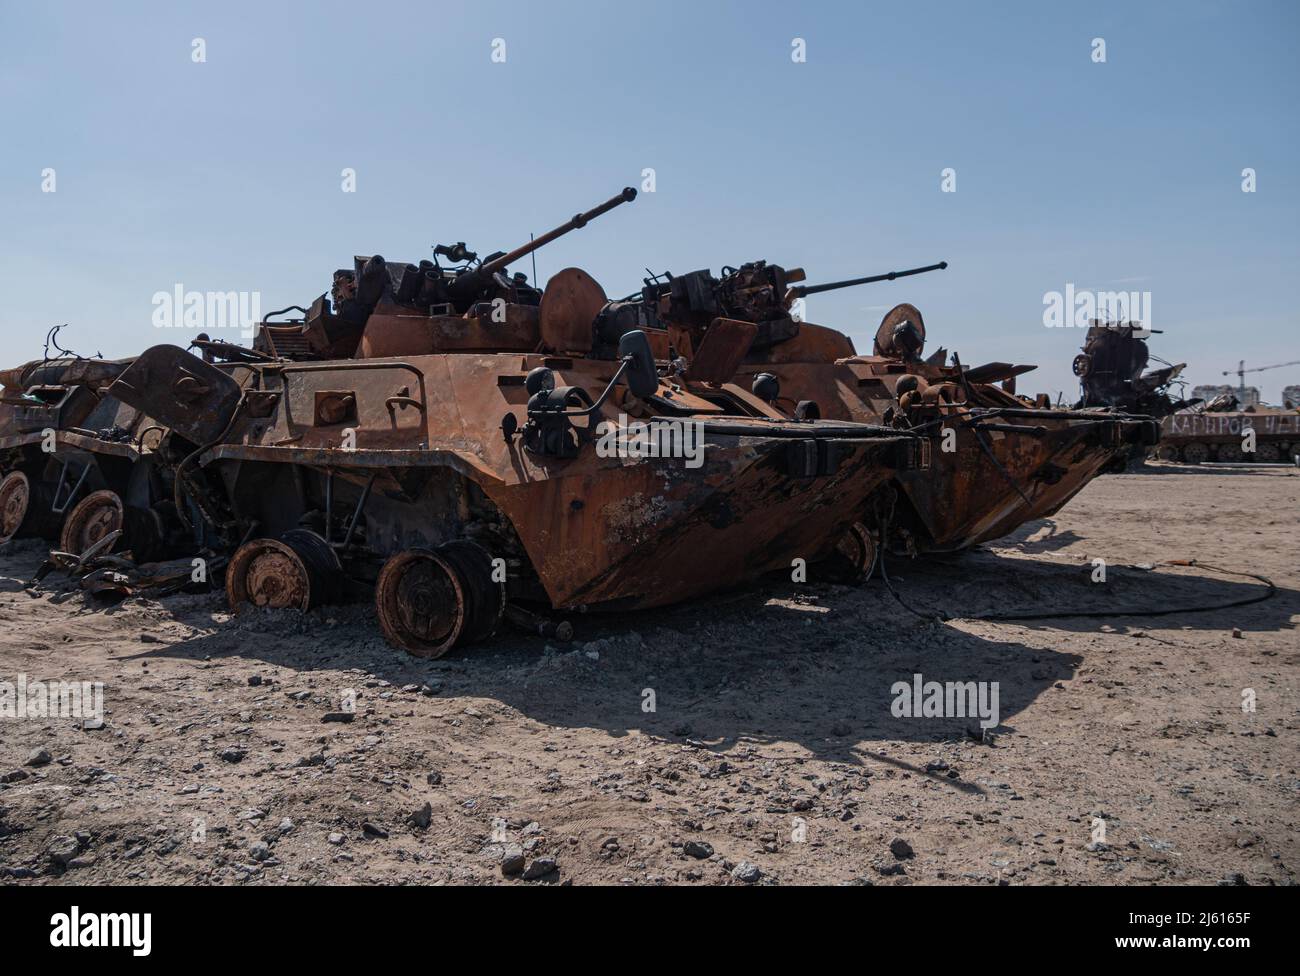 Bucha, Ukraine - April 2022: Broken tanks and combat vehicles of the Russian invaders in the village of Bucha, Kiev region. Cemetery of burnt military equipment. Armored personnel carrier - BTR Stock Photo